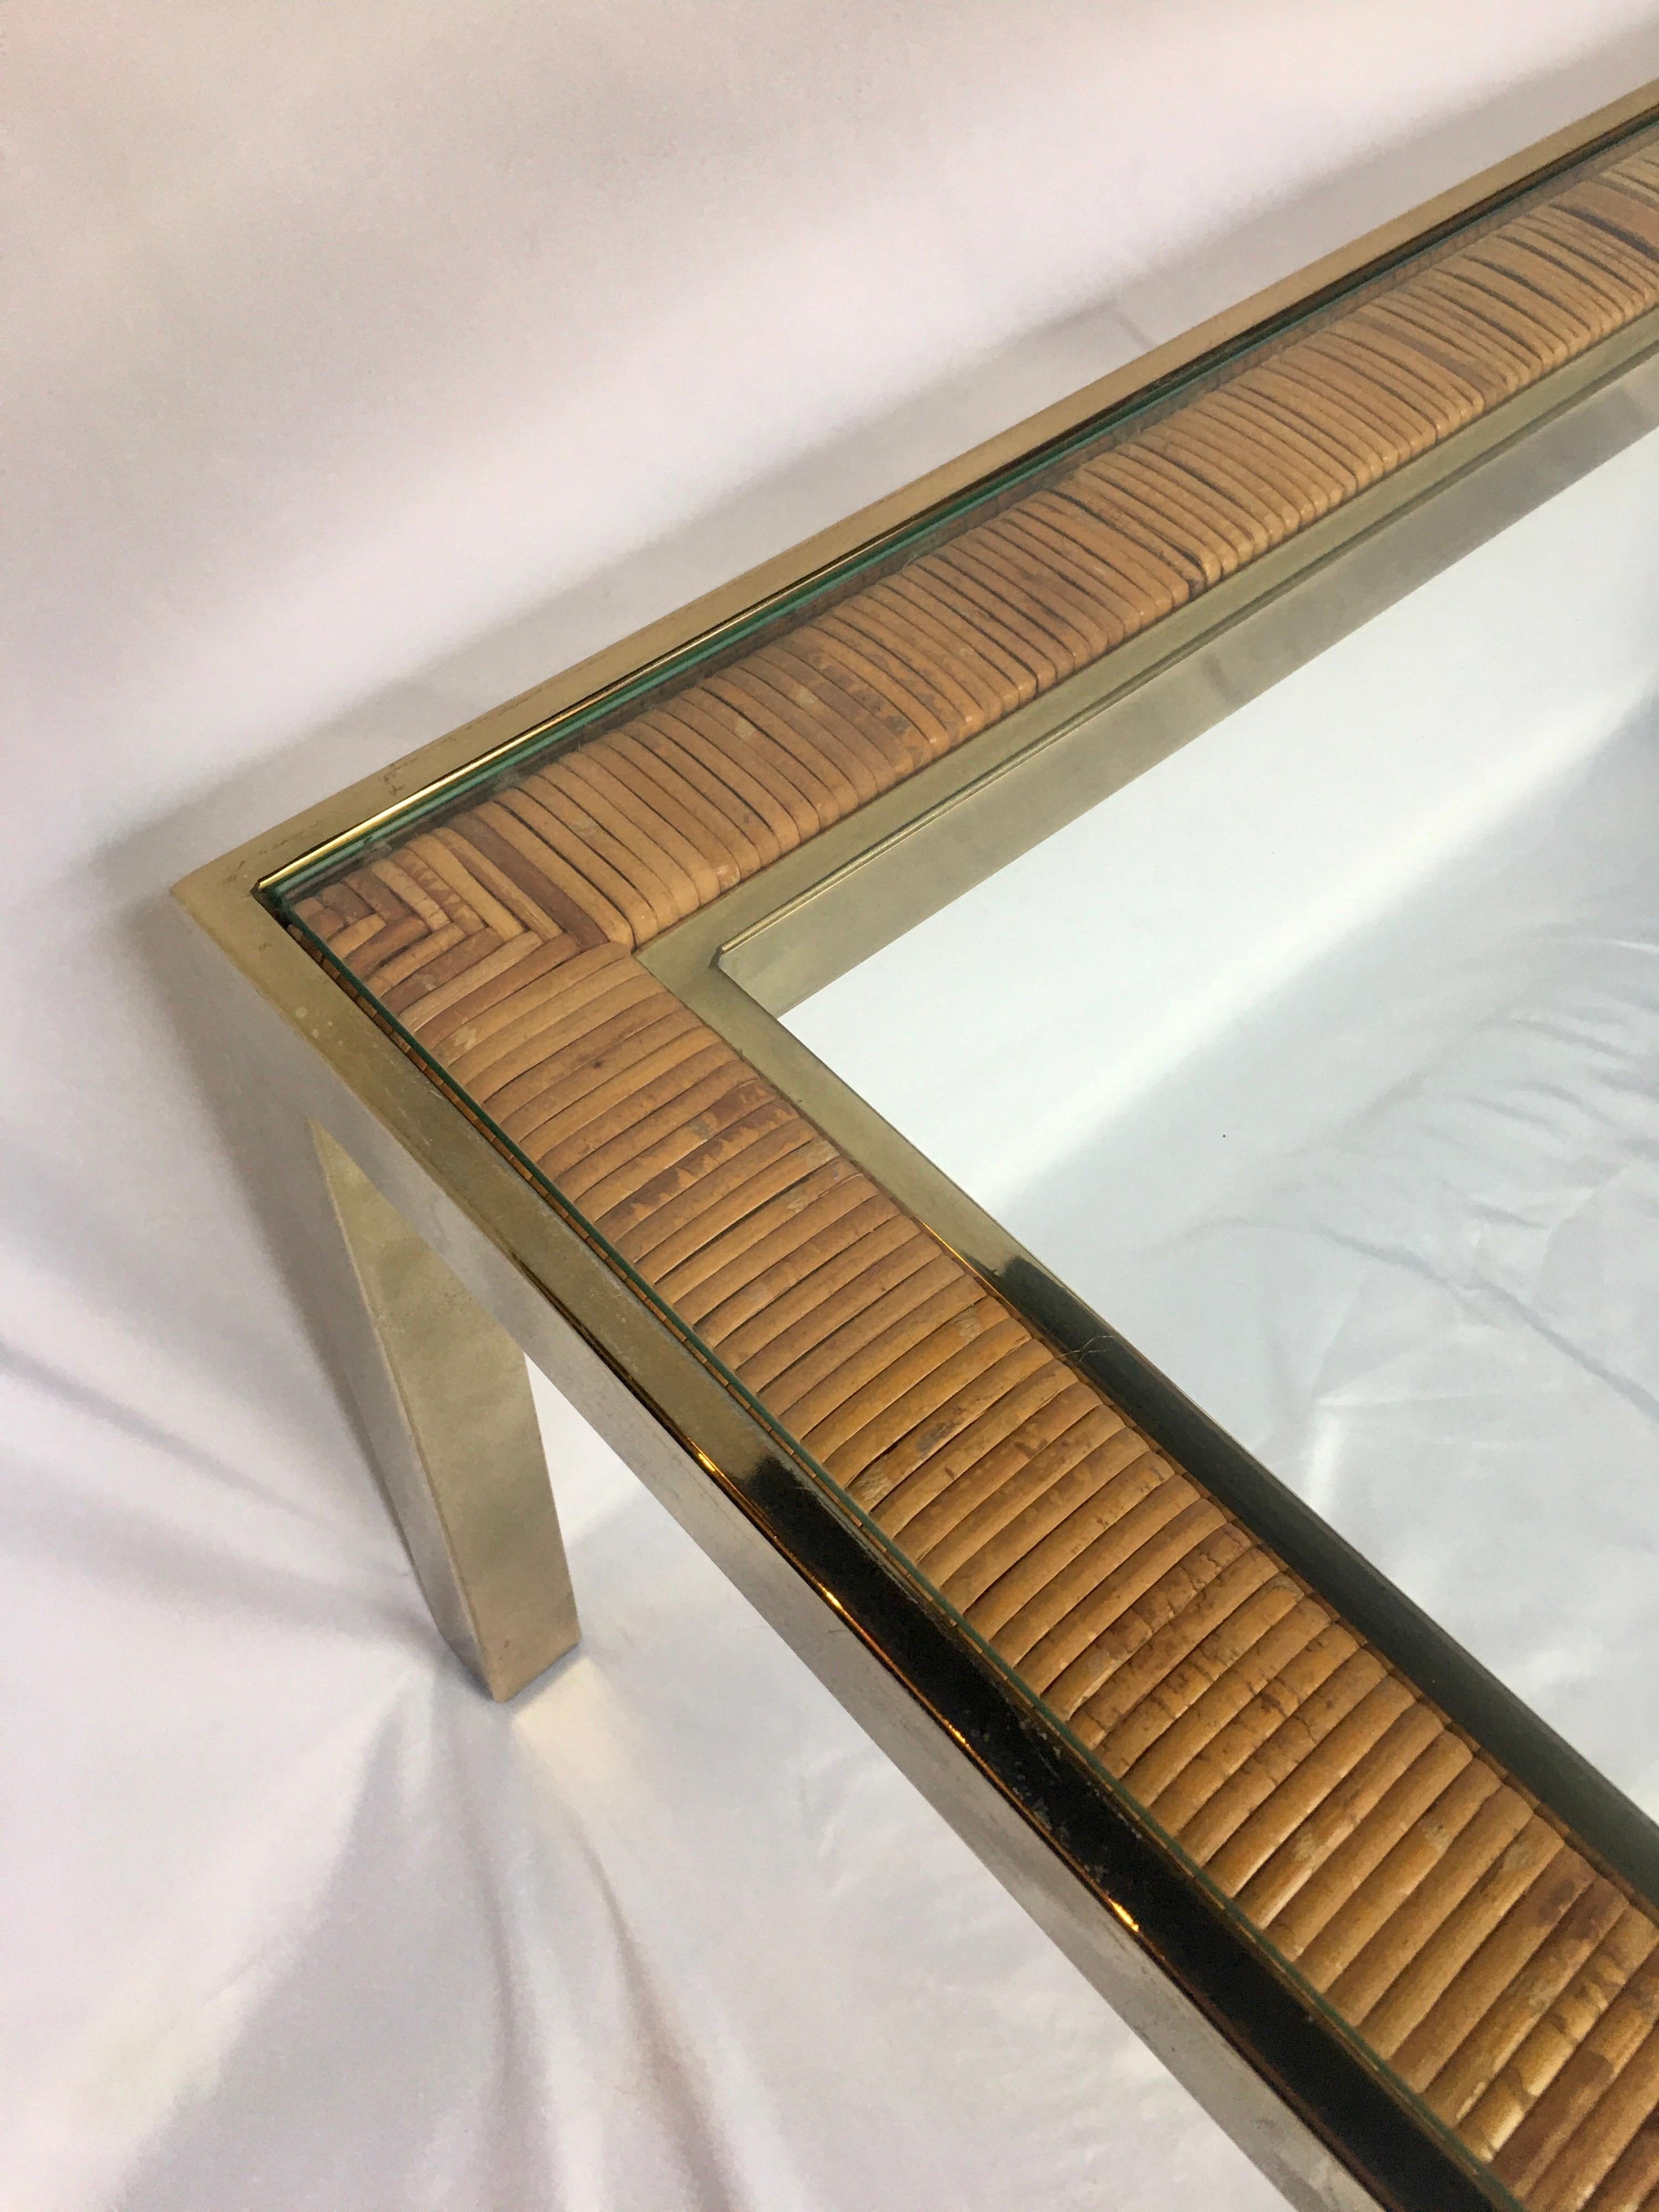 Late 20th Century Mid-Century Modern Square Brass and Rattan Coffee Table, Milo Baughman DIA Style For Sale